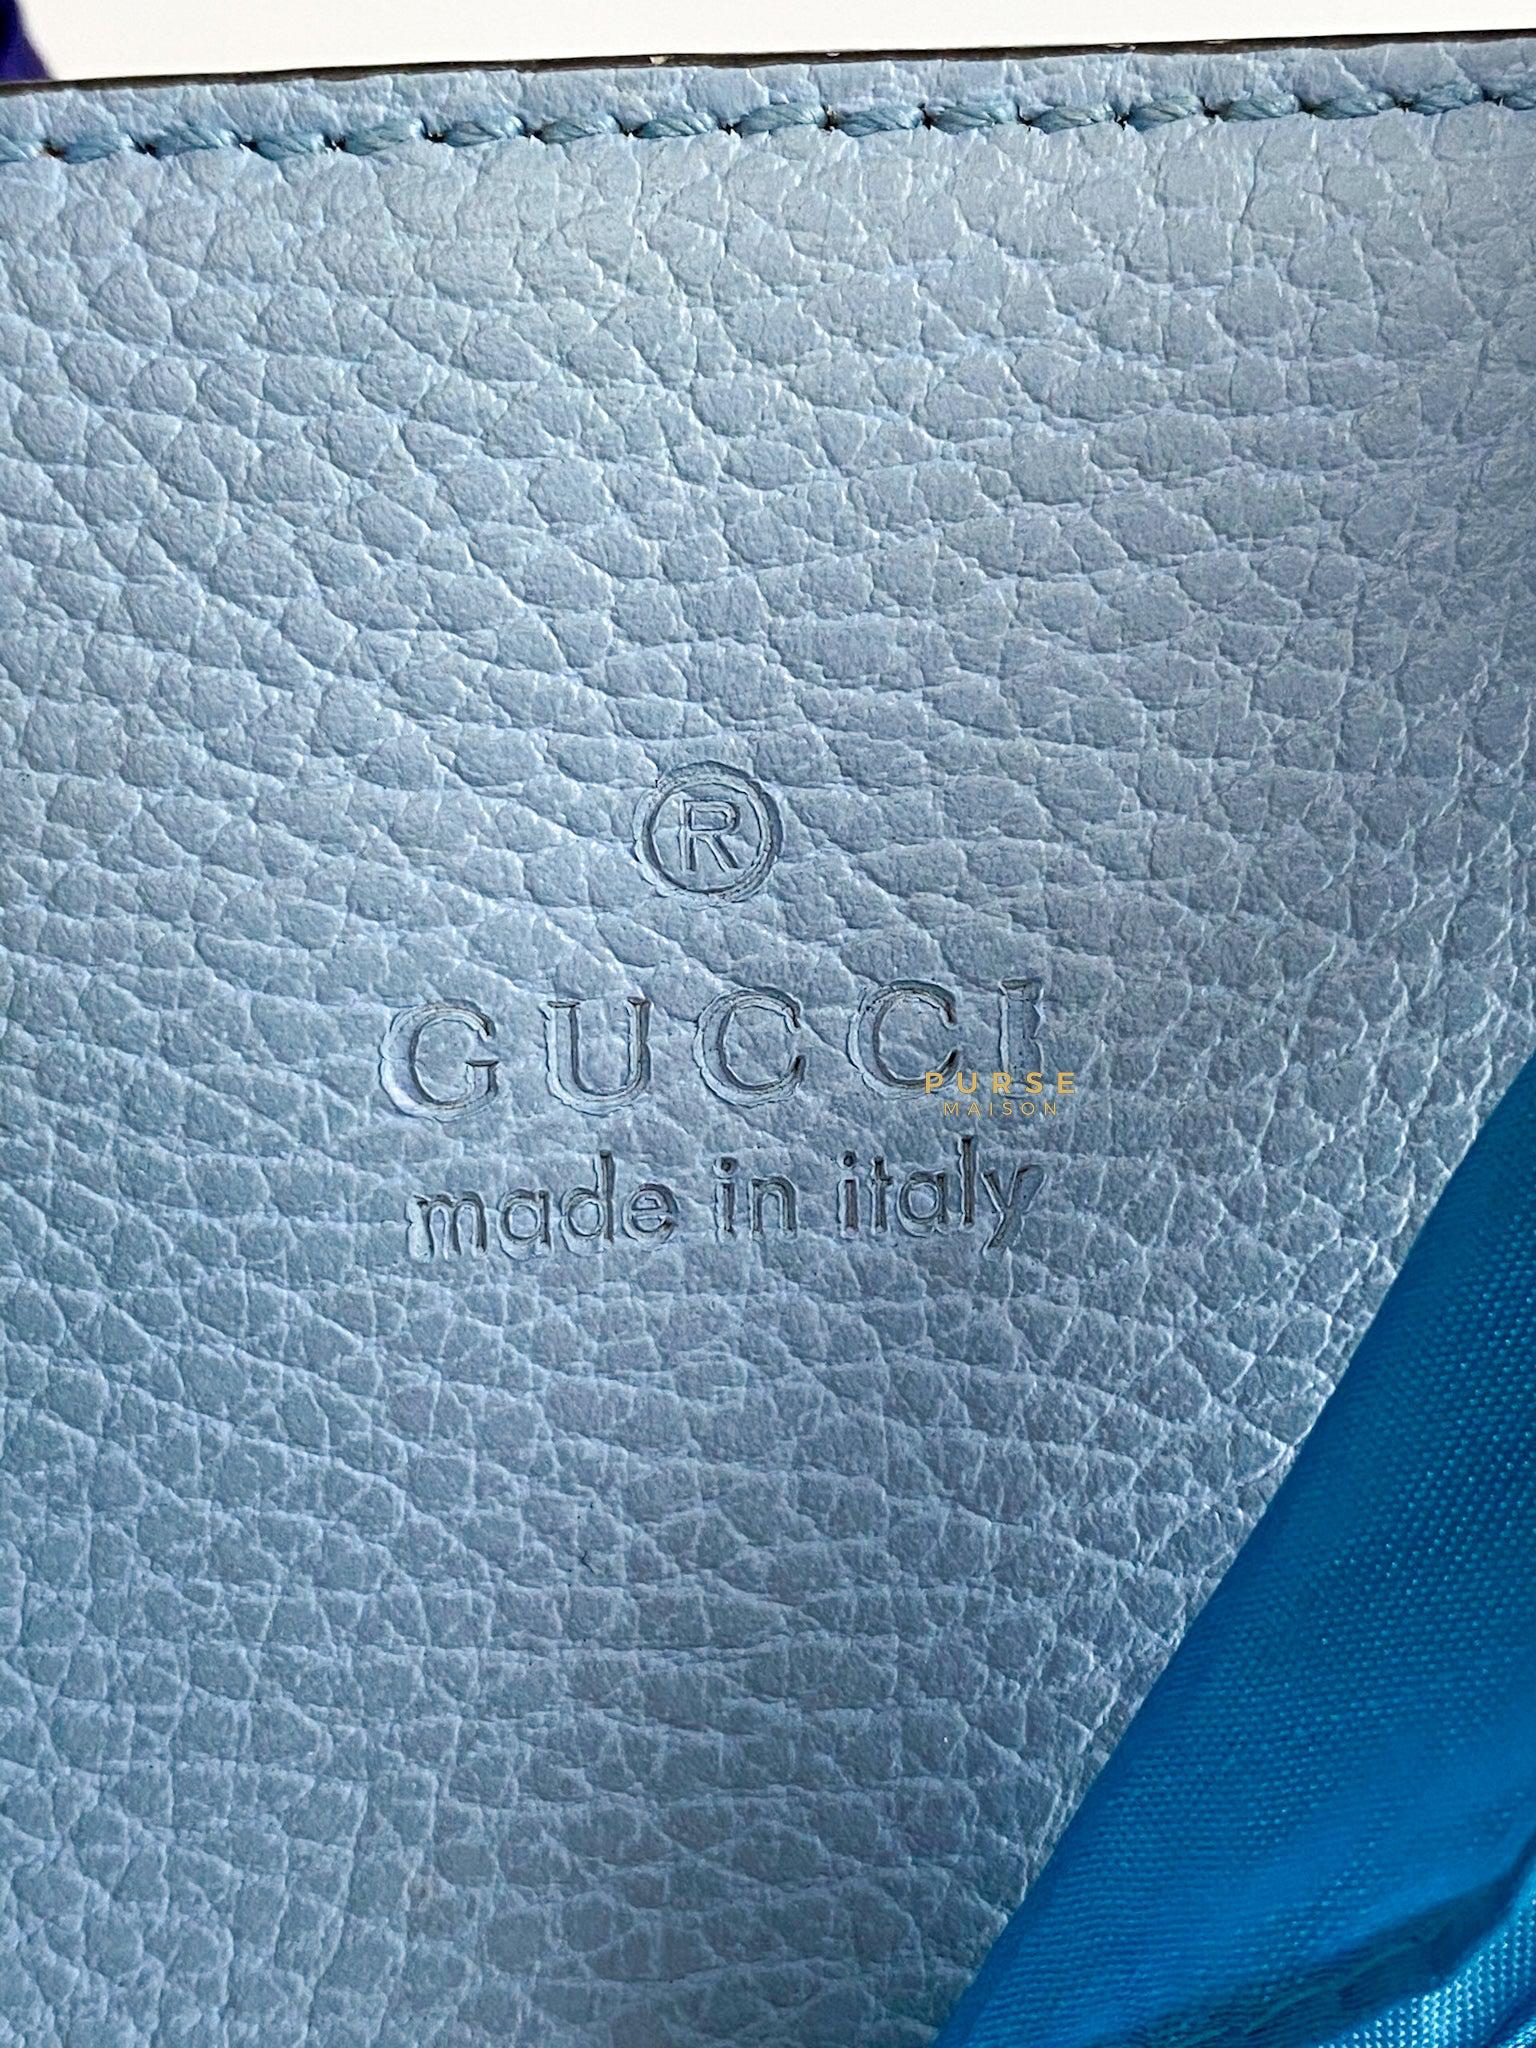 Gucci Bamboo Light Blue Leather Tote Bag